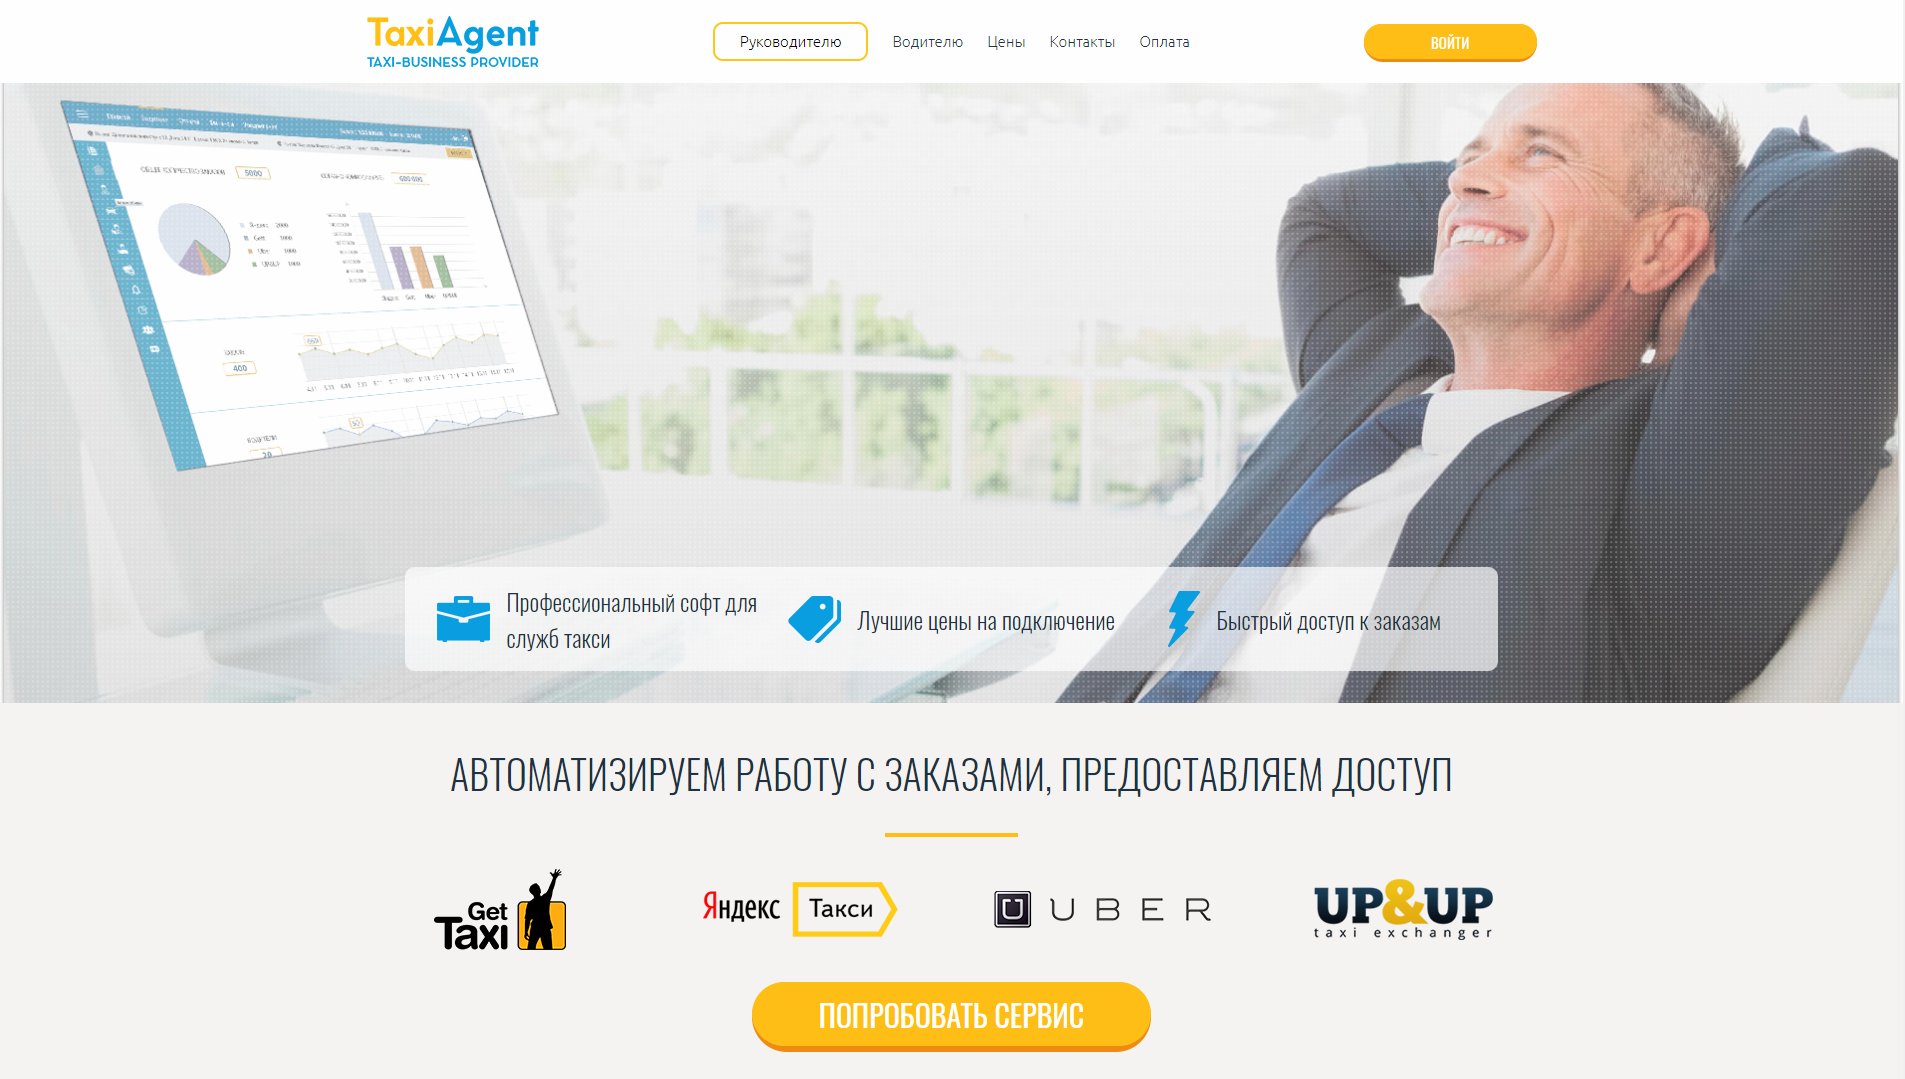 TaxiAgent - for leader